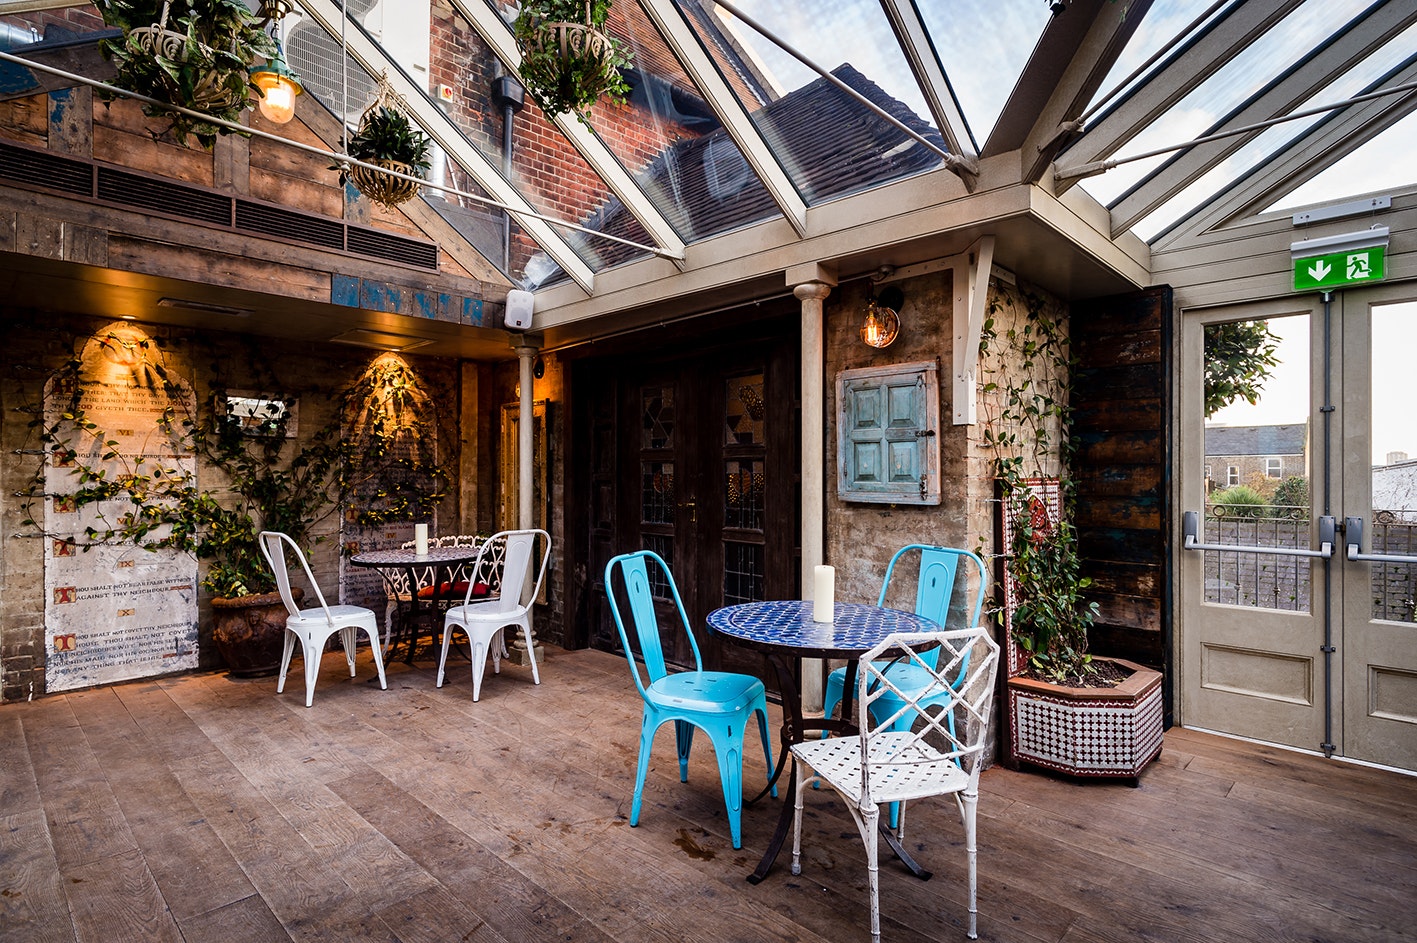 Engagement Party Venues in London - Paradise by way of Kensal Green